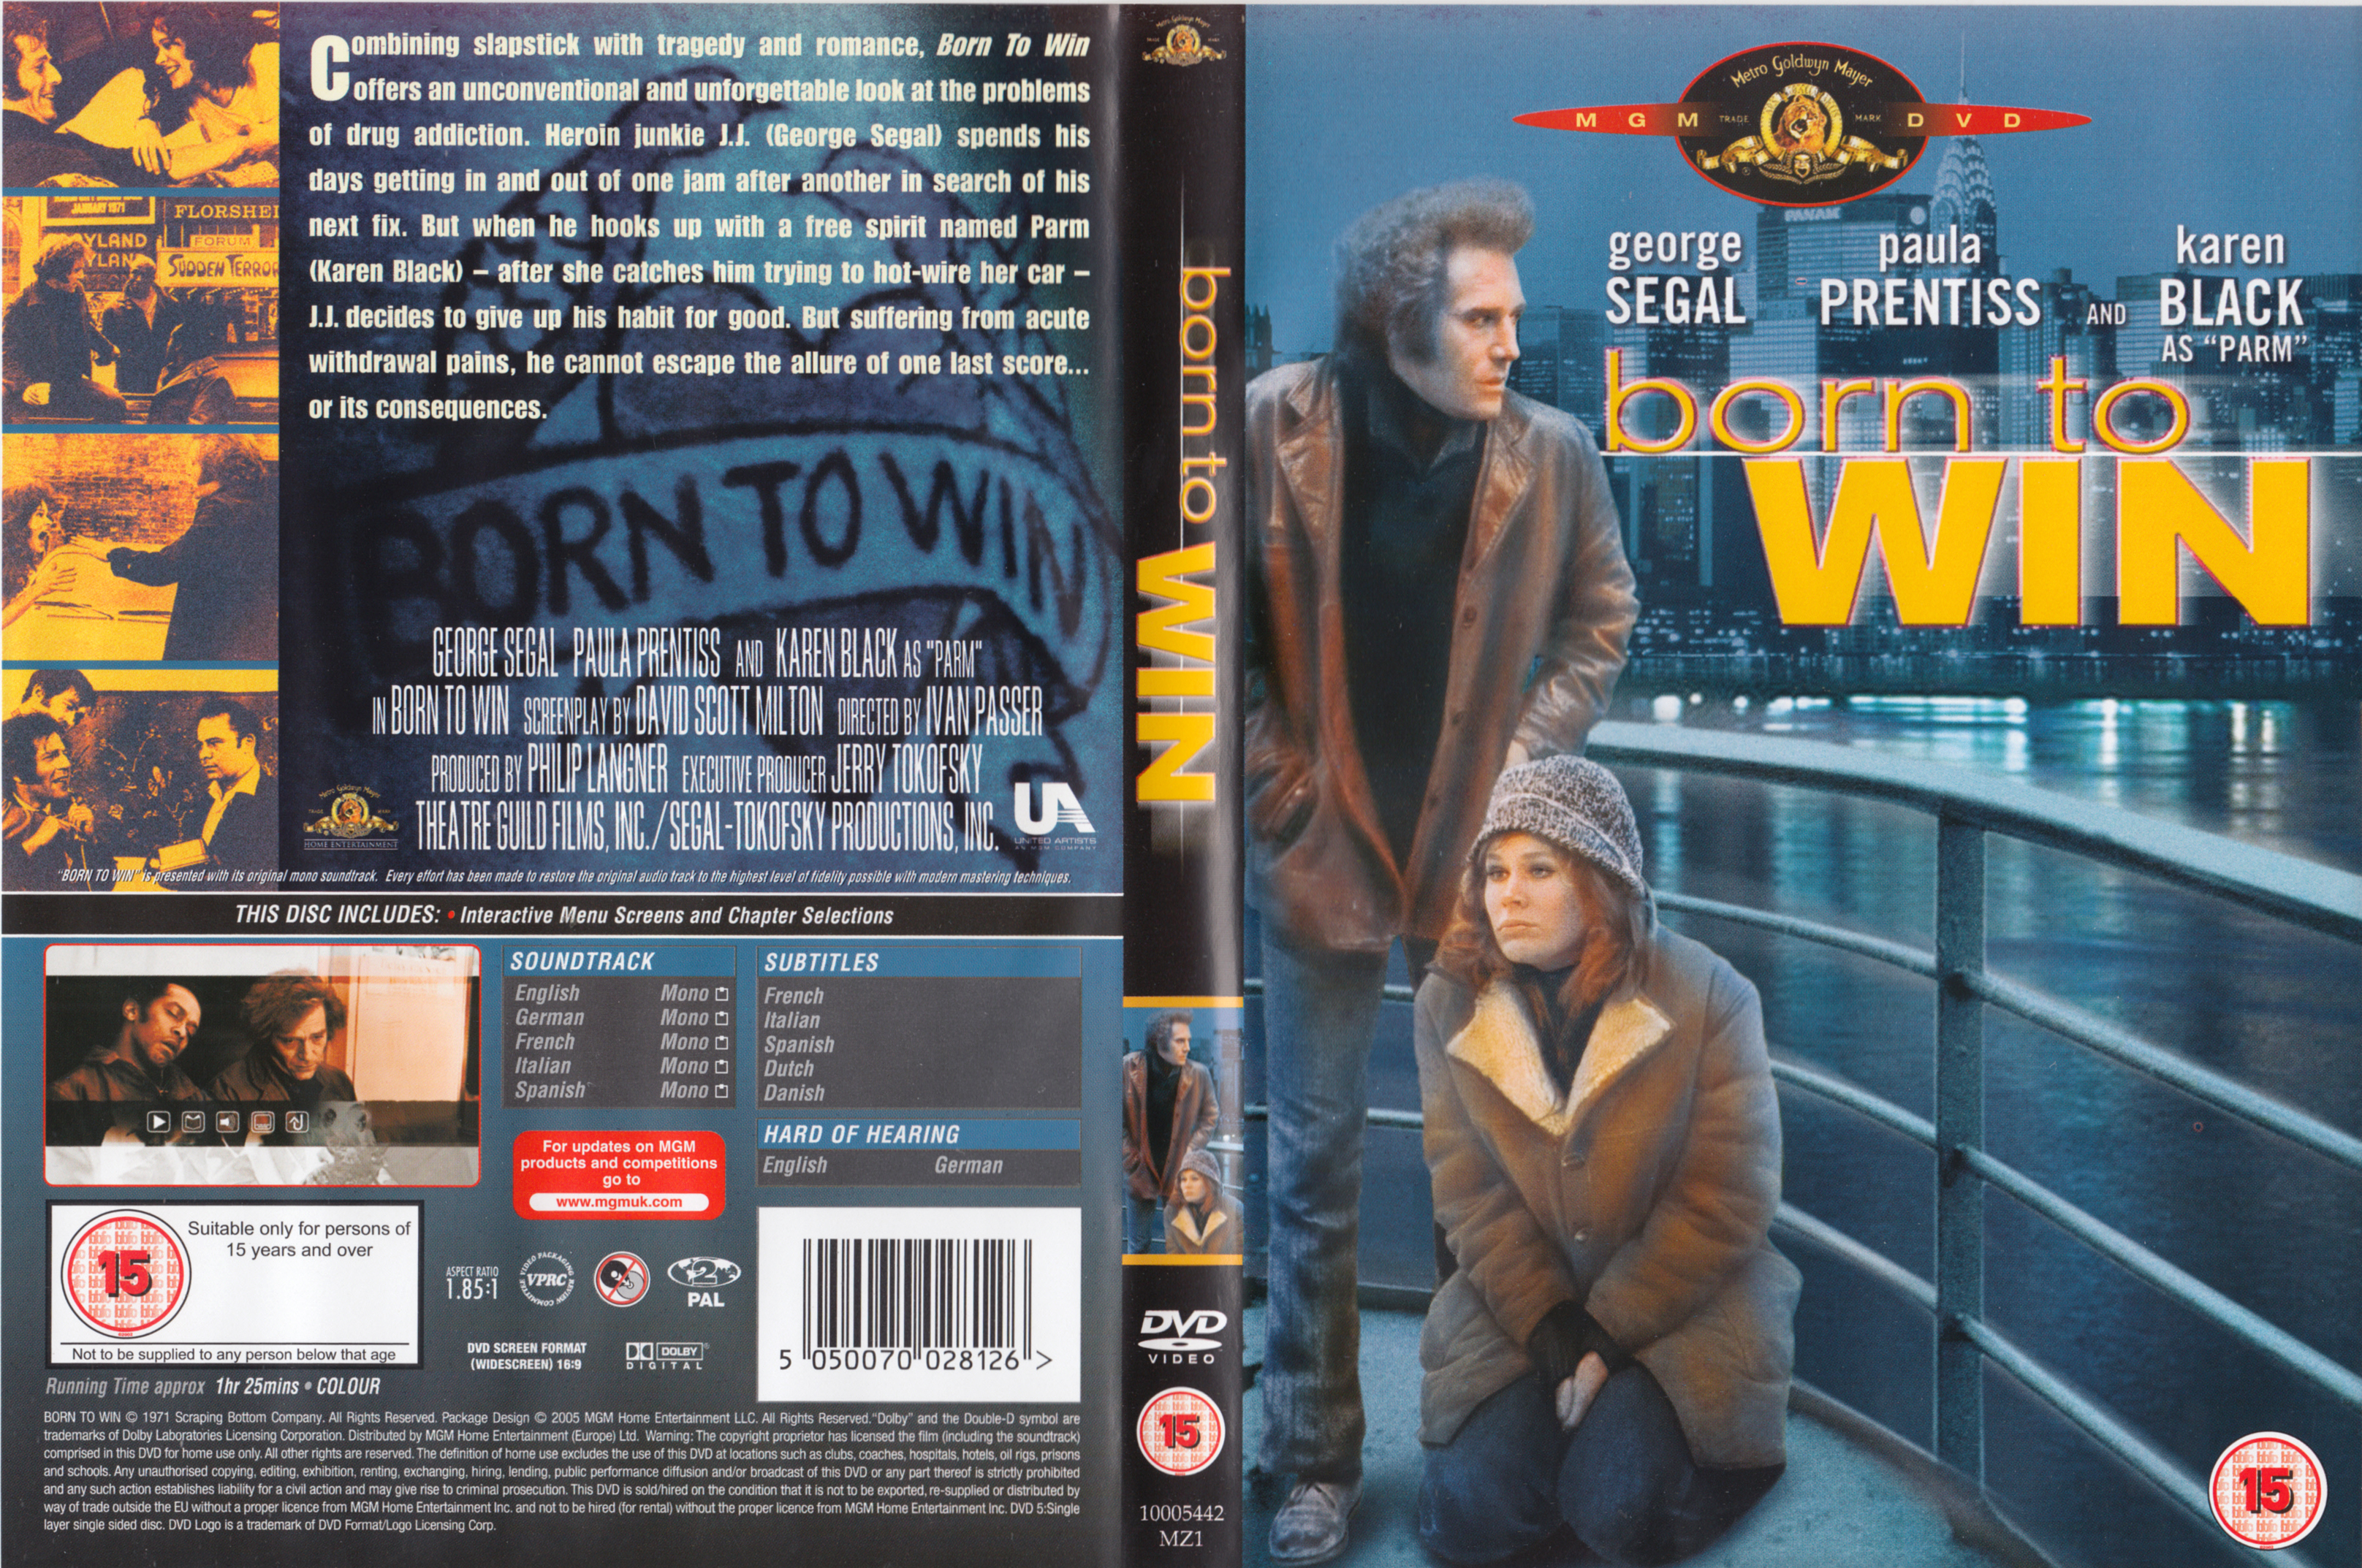 Jaquette DVD N pour vaincre - Born to win Zone 1